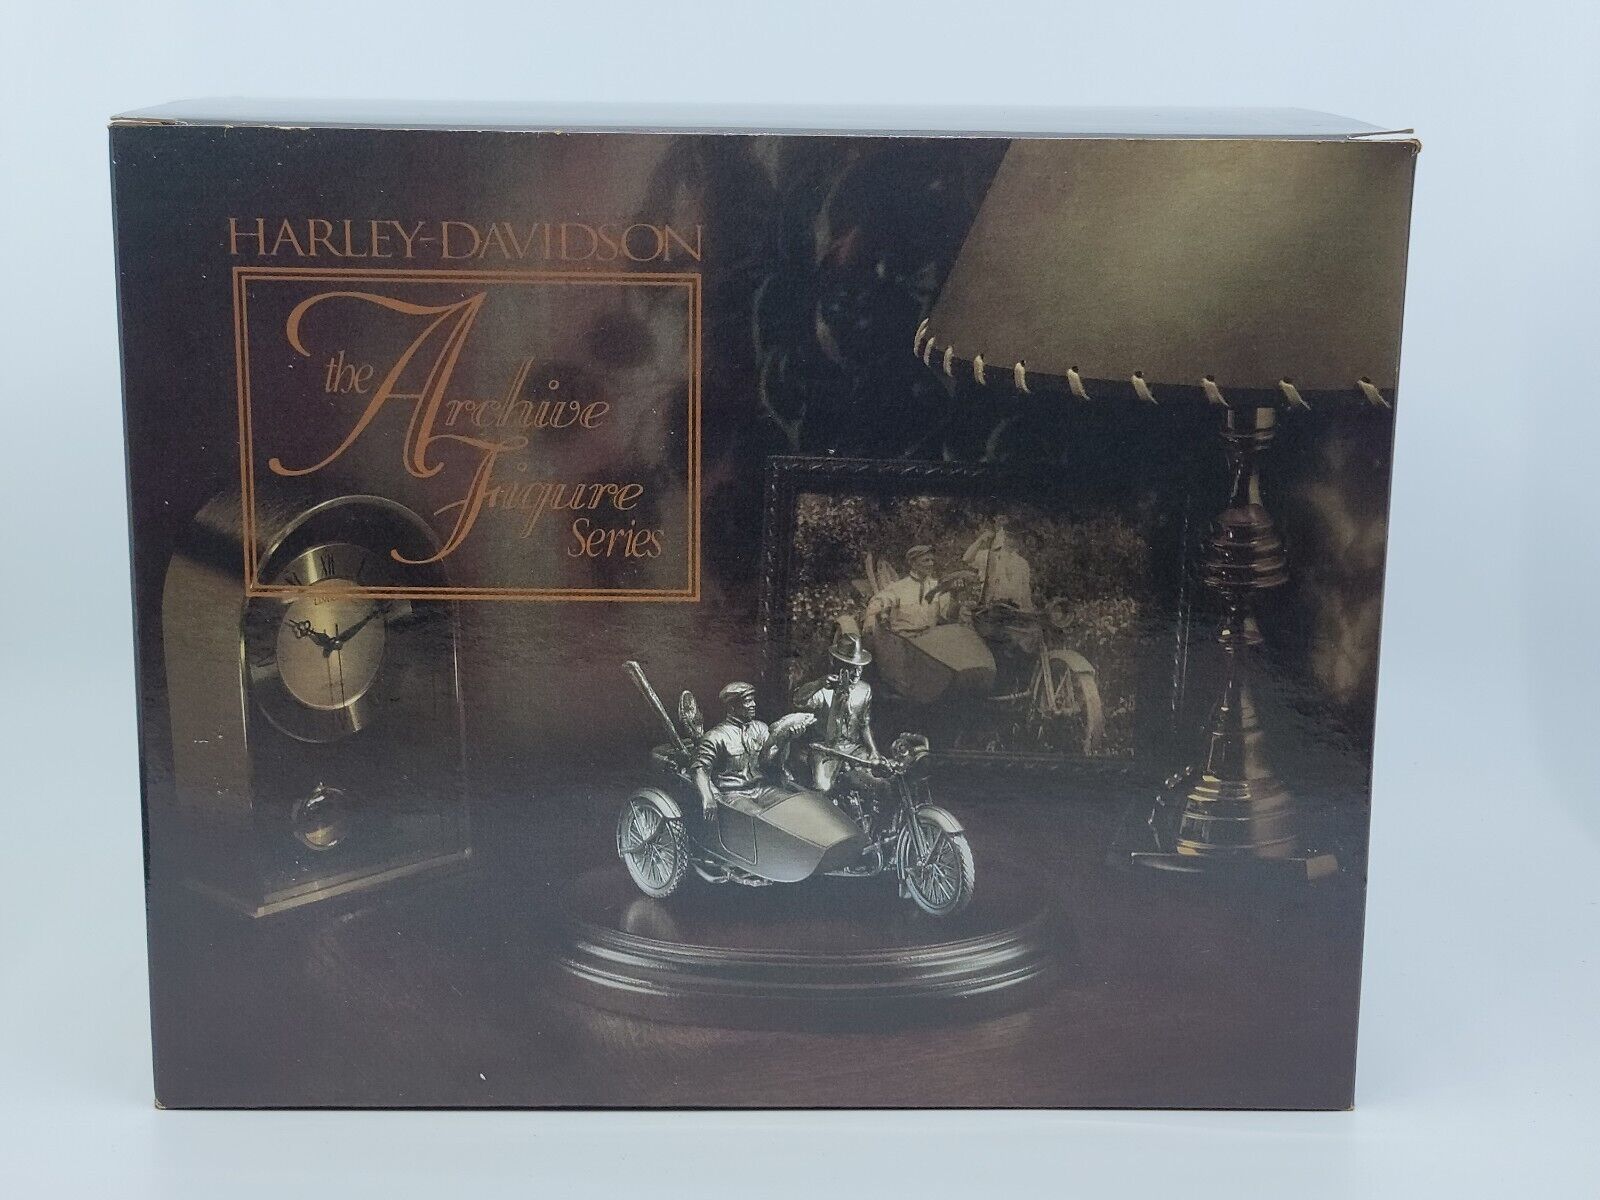 Harley Davidson Pewter Catch Of The Day Archive Figure Series 99450-93Z /2500